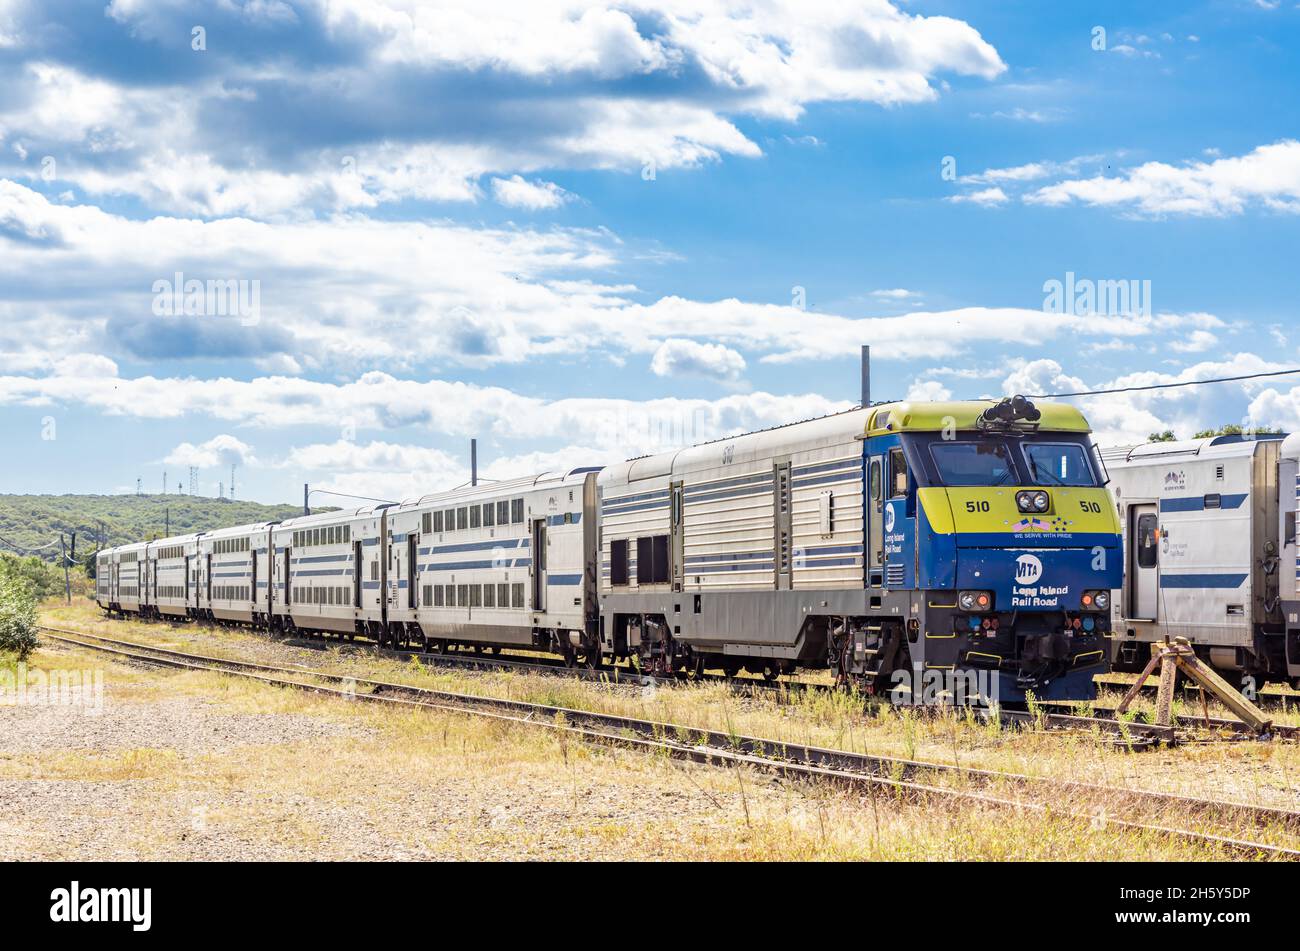 LIRR engine and cars in Montauk, NY Stock Photo